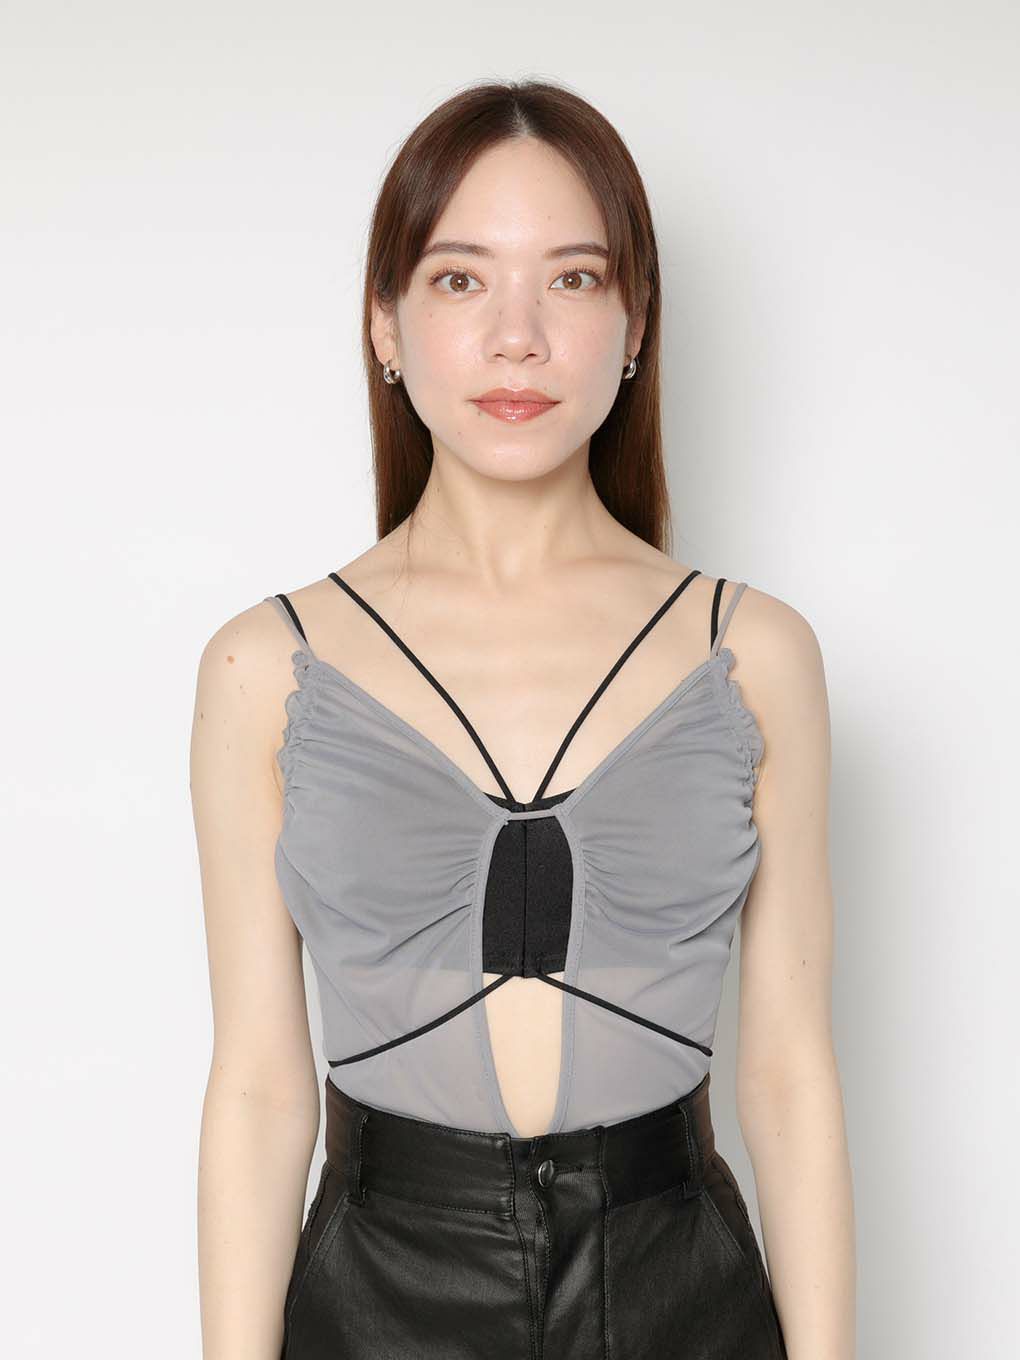 sheer cover camisole